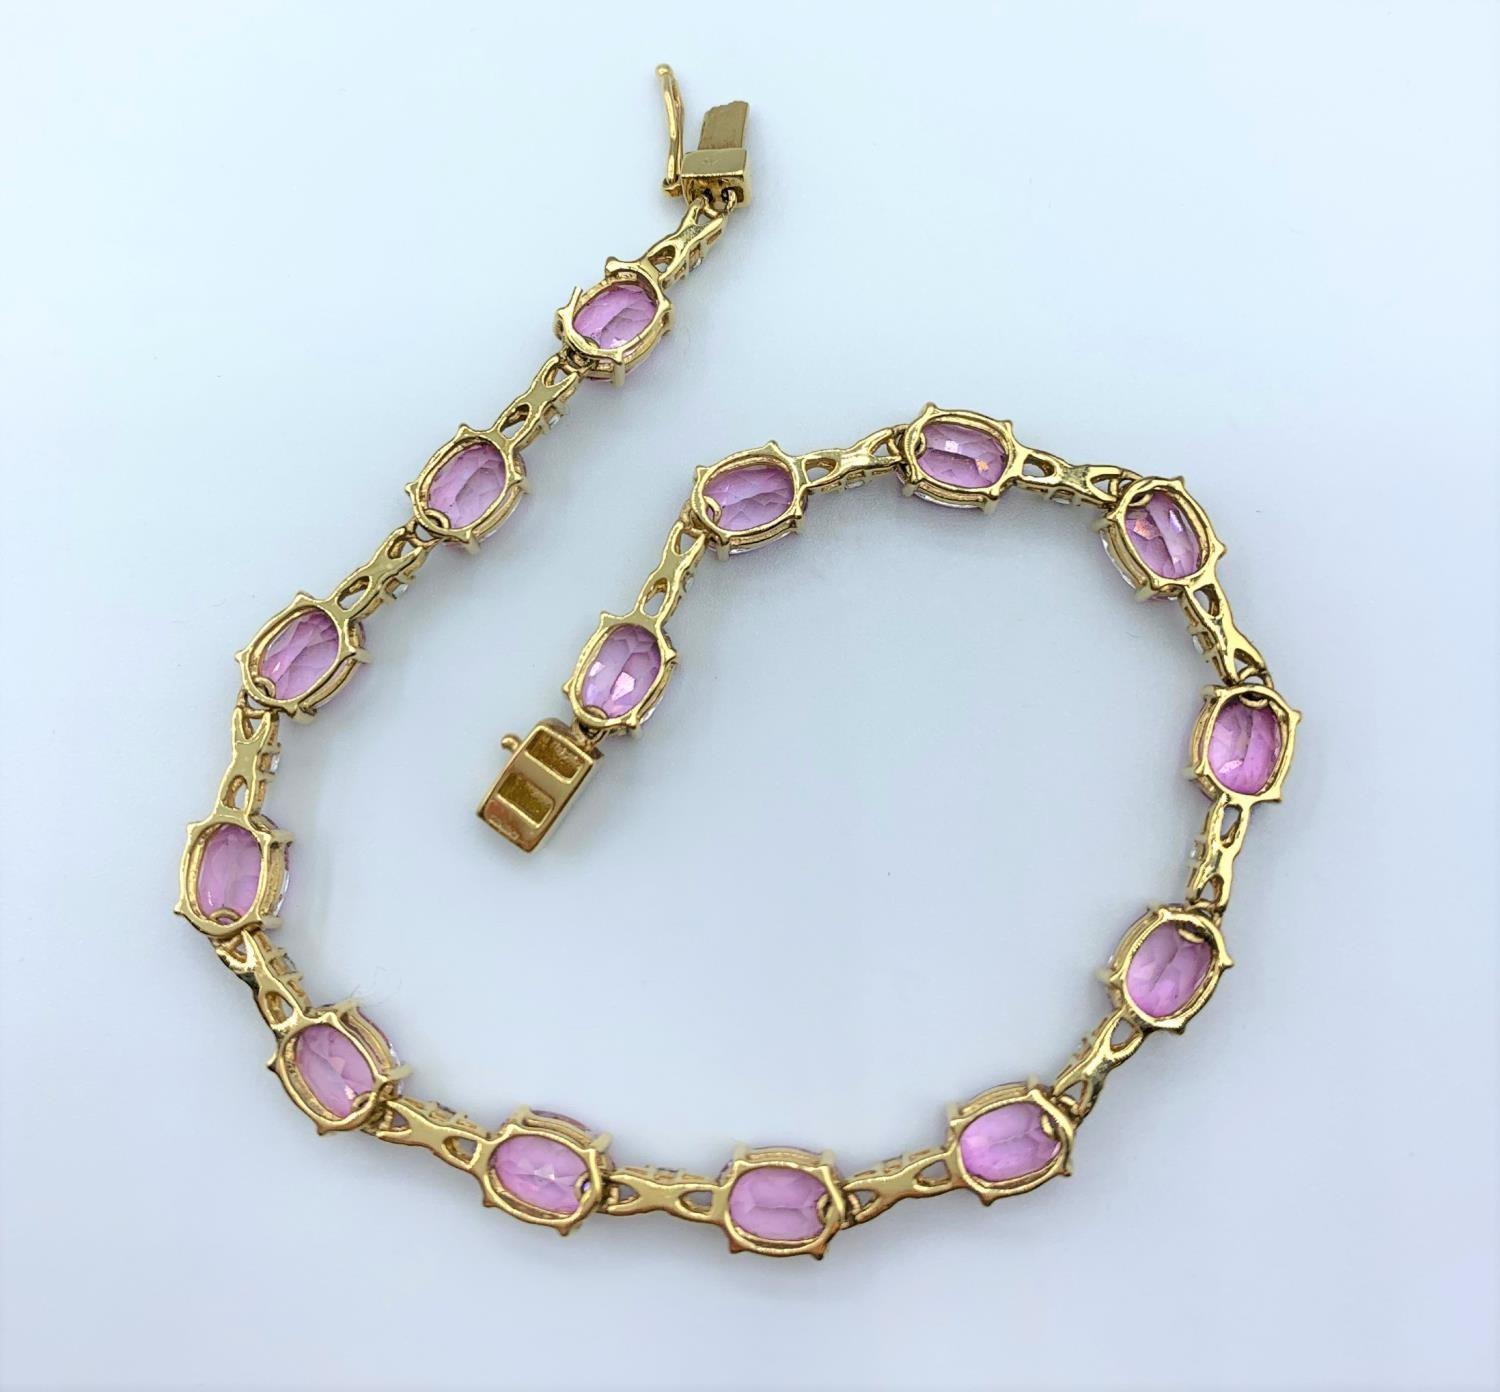 9ct gold attractive bracelet with pink stones, approx 15cm long and weight 8.5g - Image 3 of 8